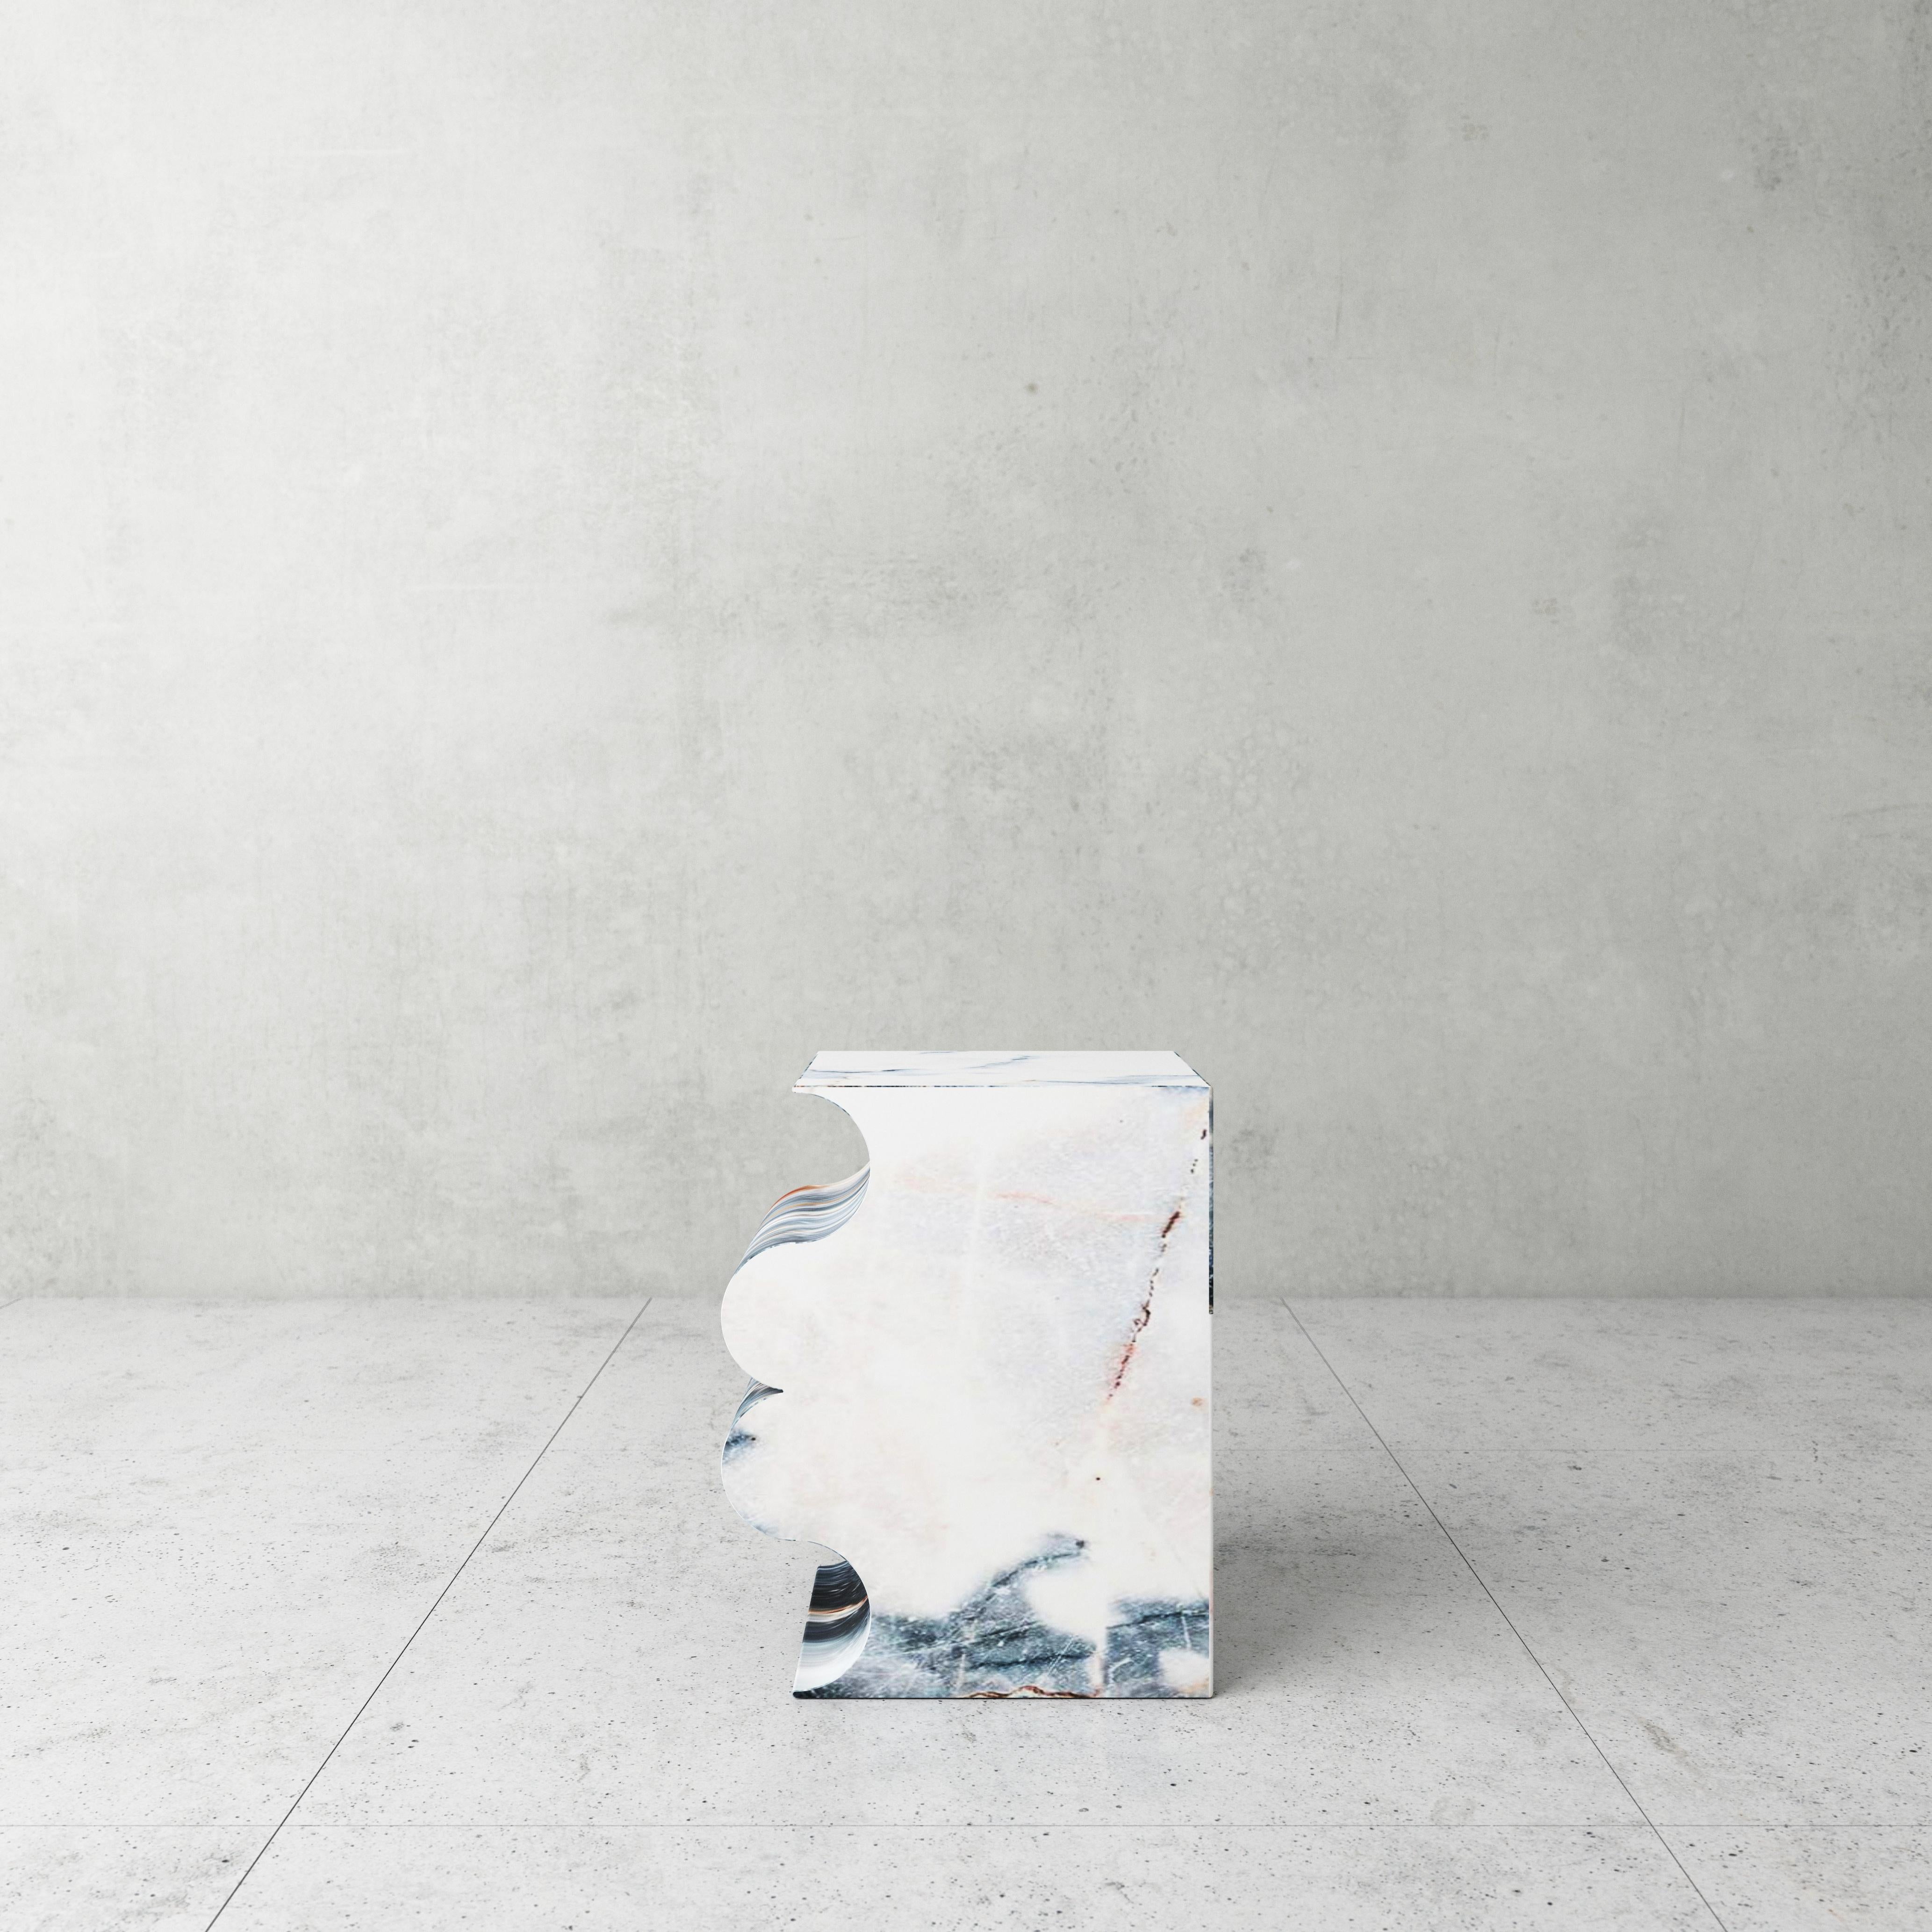 Paonazzo marble sculpted stool by Pietro Franceschini
Sold exclusively by Galerie Philia
Materials: Paonazzo marble
Dimensions: W 32cm, L 41cm, H 50cm
Origin: Italy (Carrara)
Manufacturer: Corsanini SRL

Pietro Franceschini
Pietro